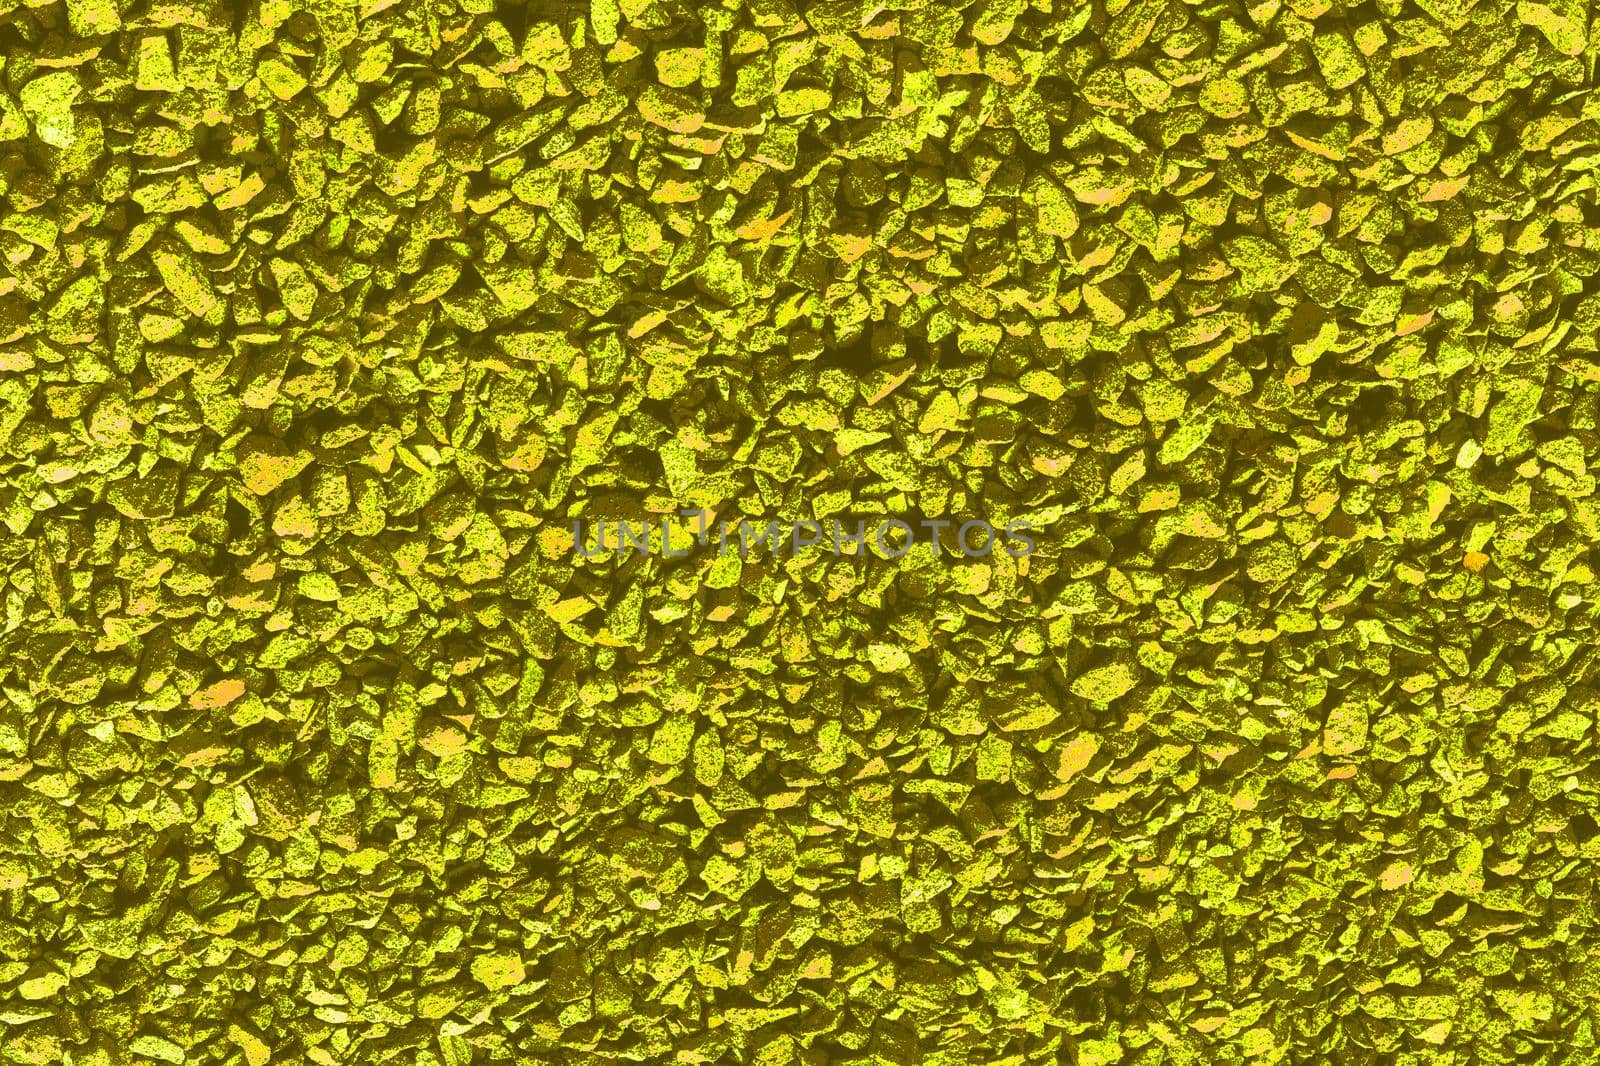 Golden yellow background of small stones for decor and text by jovani68